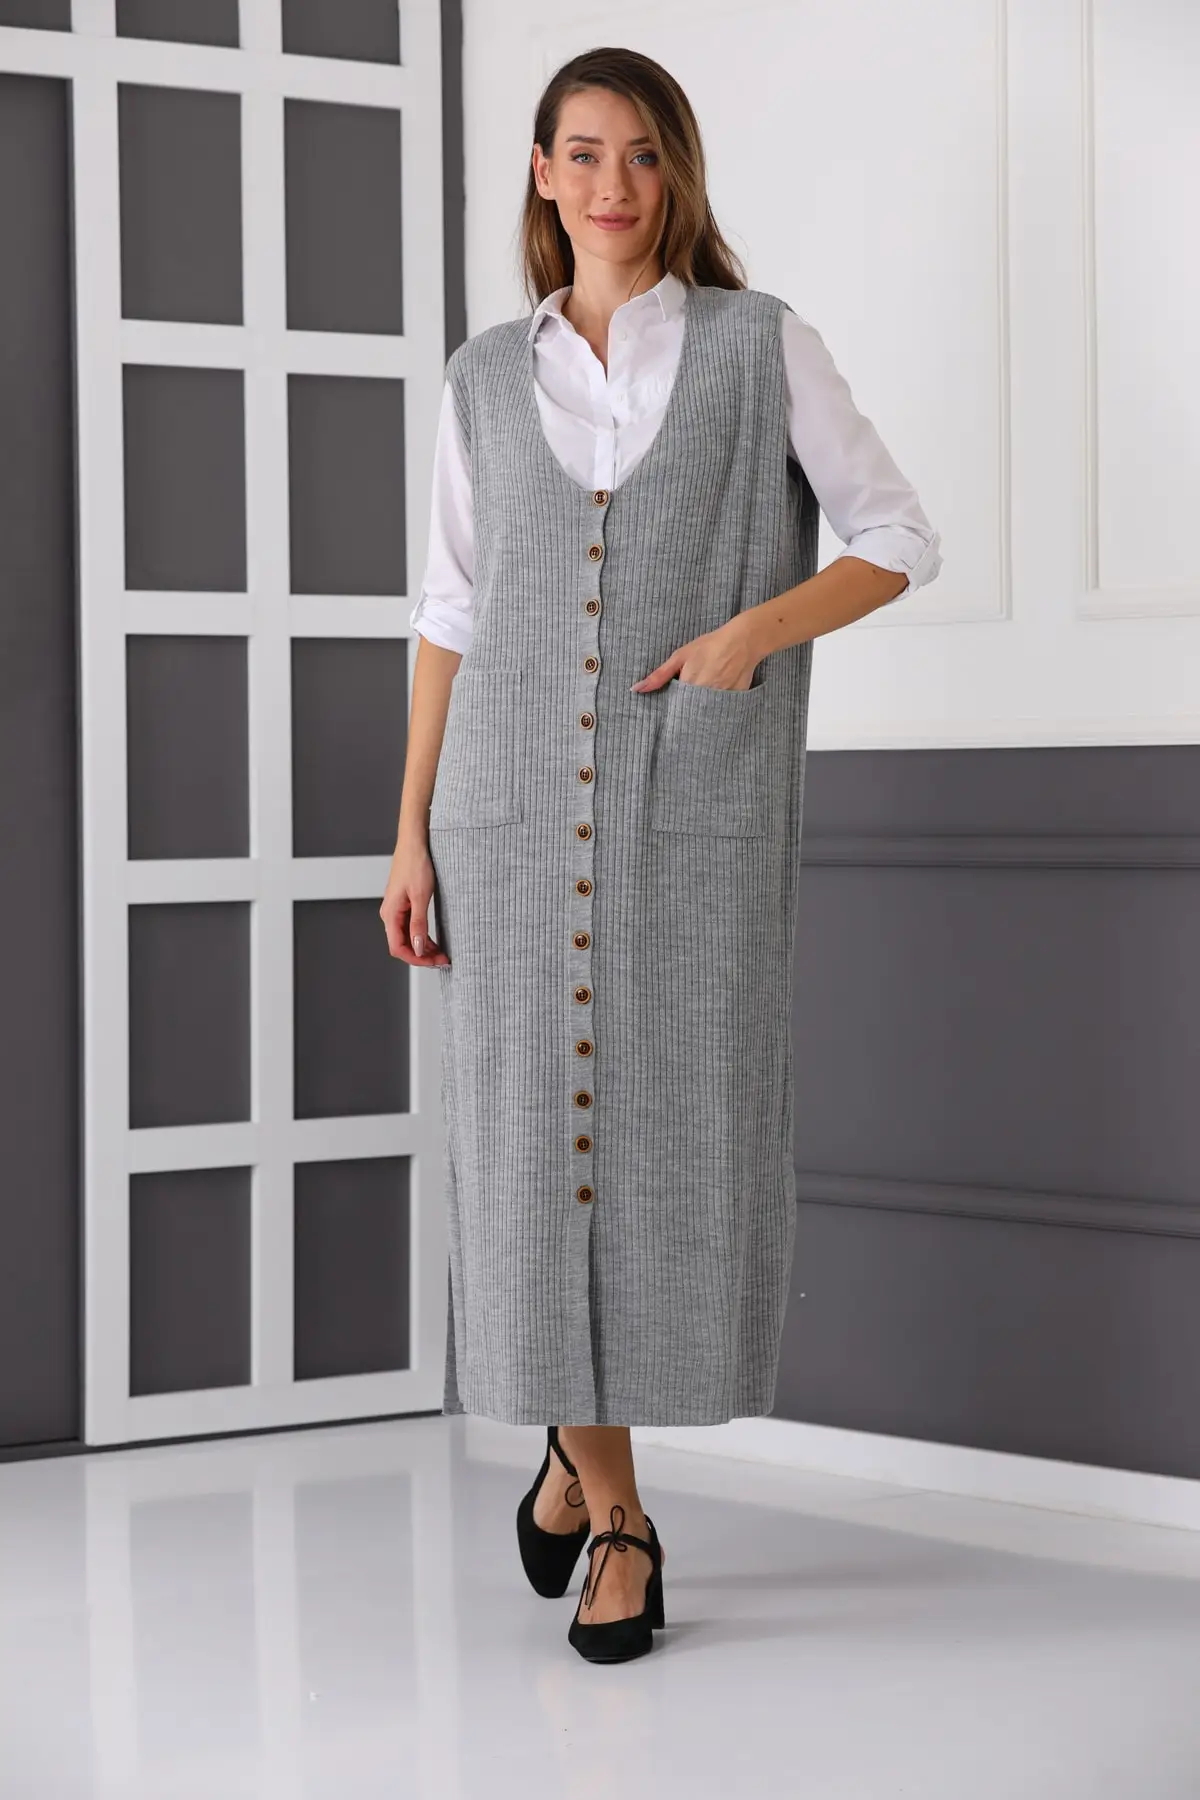 Women's gray front buttoned long Knitwear vest striped hijab jacket & clothing